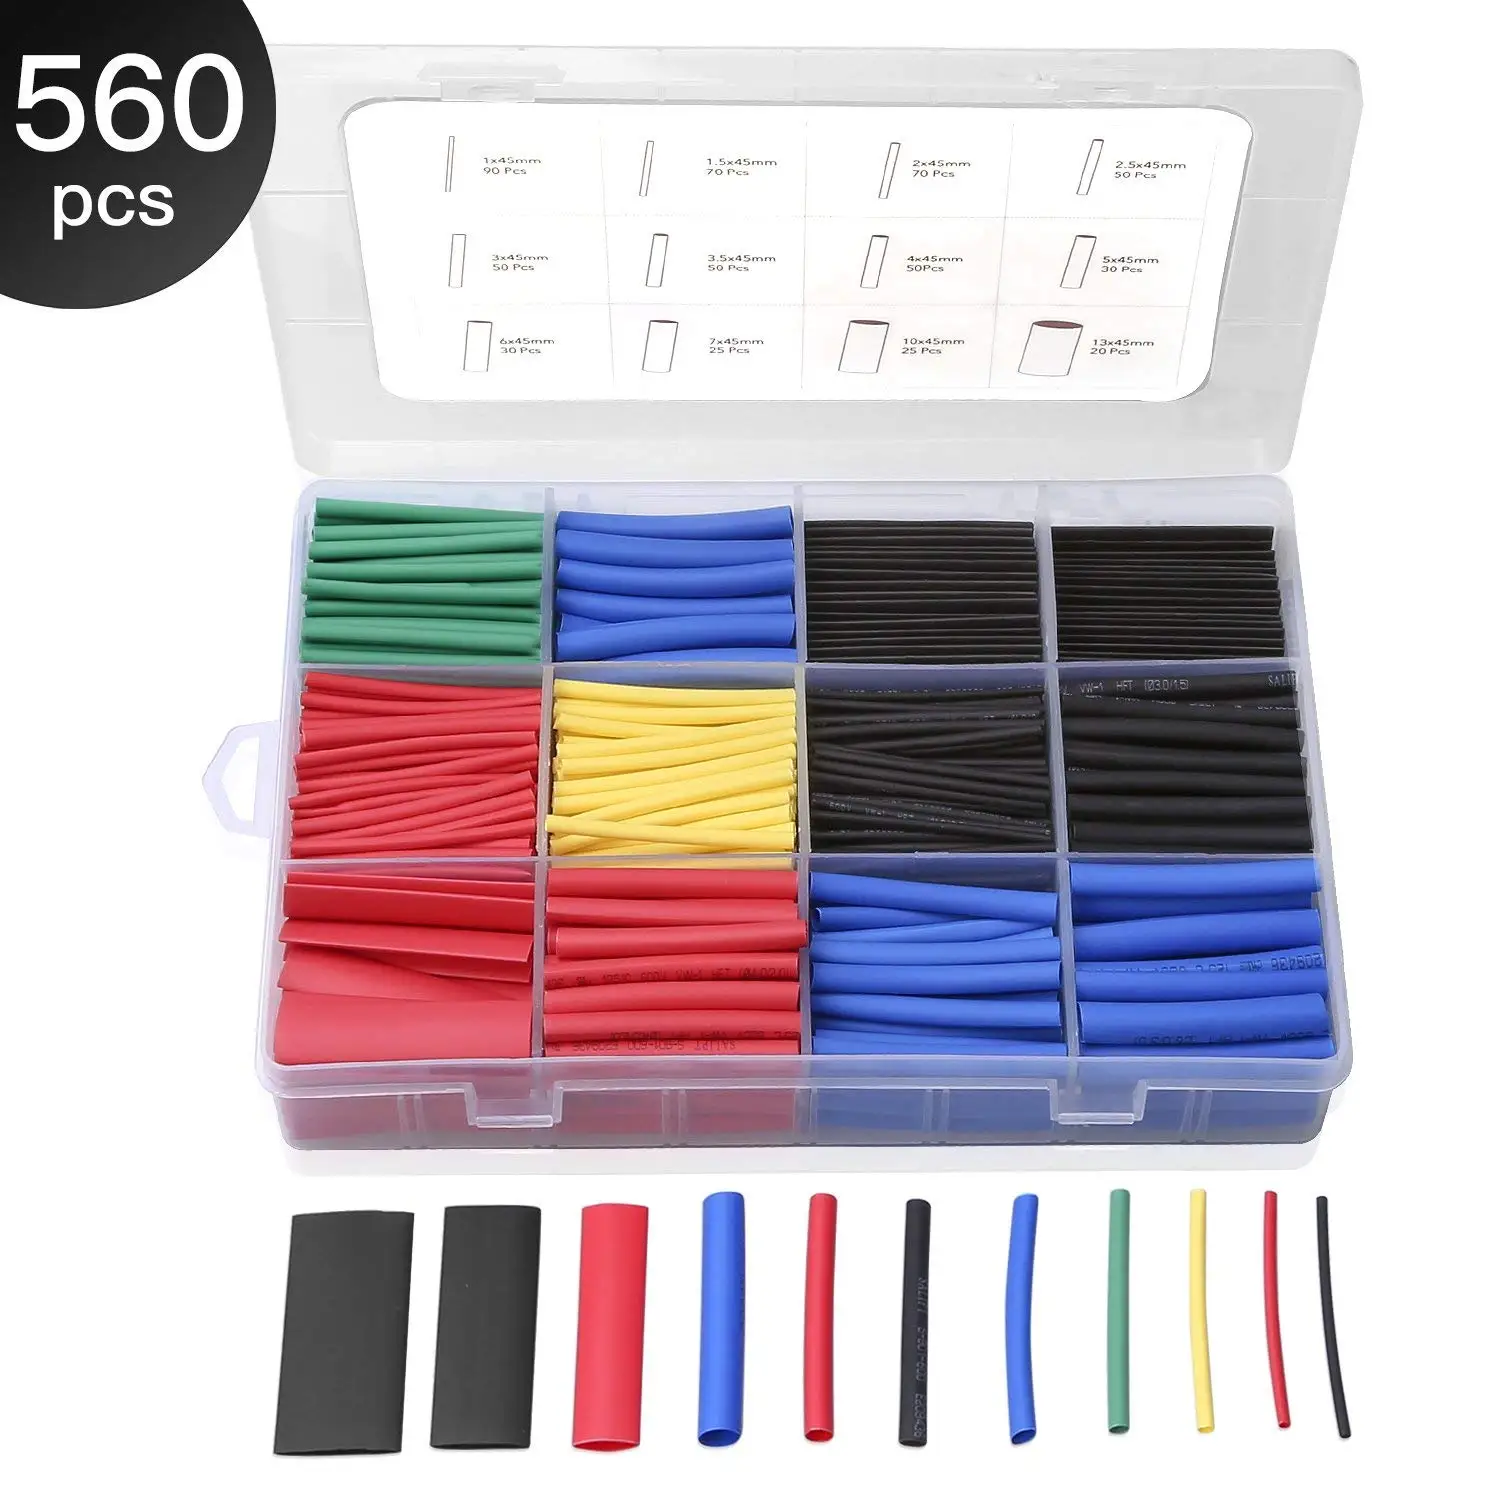 8 Sizes,Black & Red Heat Shrink Tubing Kit,2:1 Electrical Wire Cable Wrap Assortment Electric Insulation Heat Shrink Tube with Storage Case 